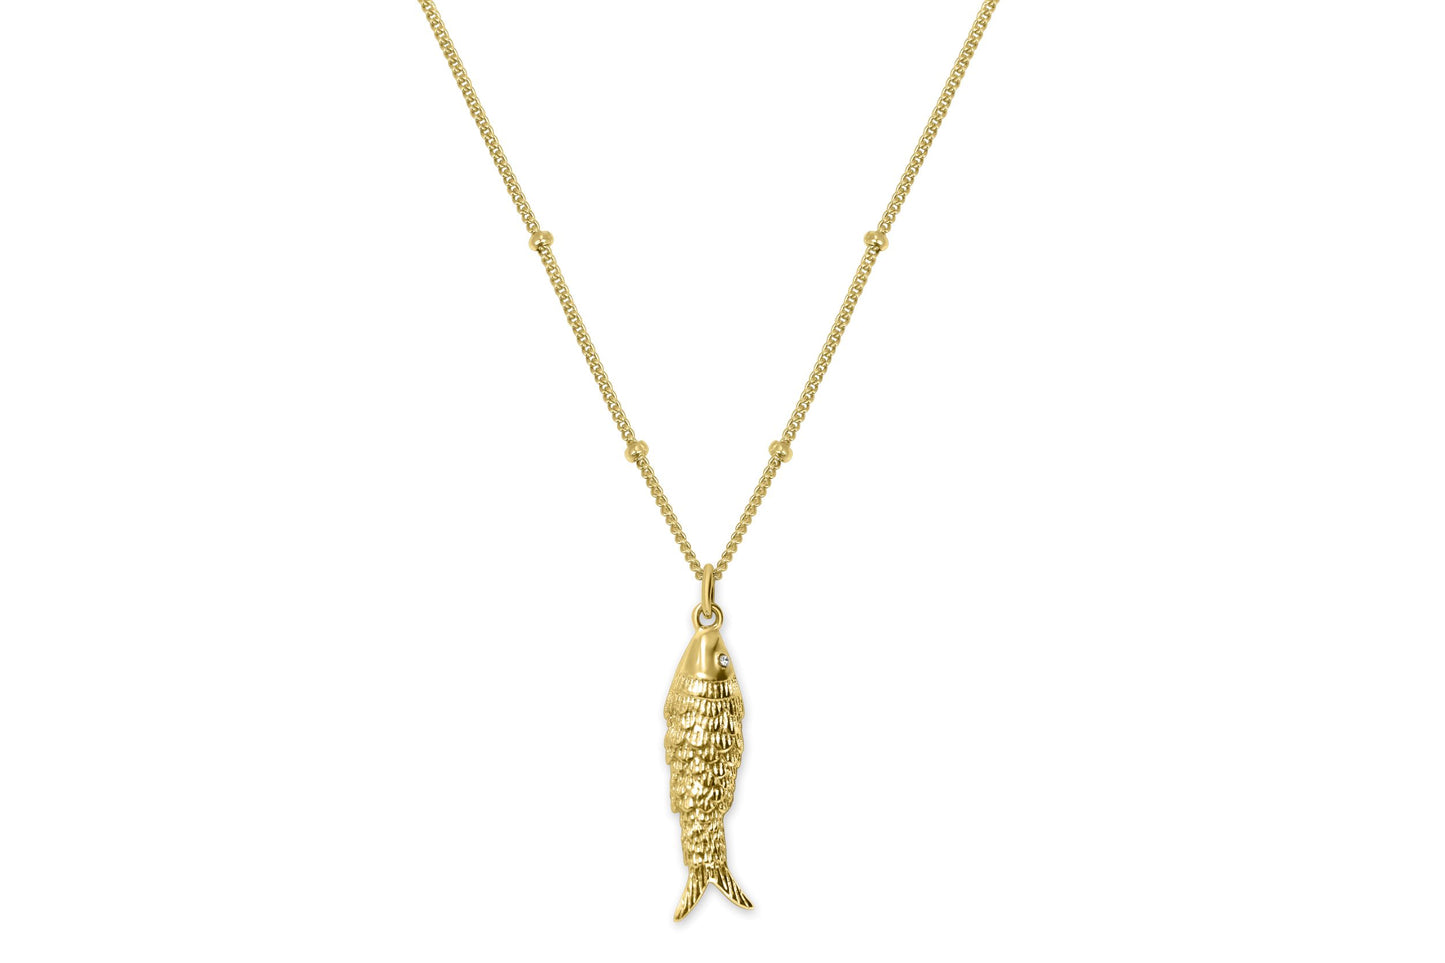 Charm & Chain Necklace - Fish Out of Water